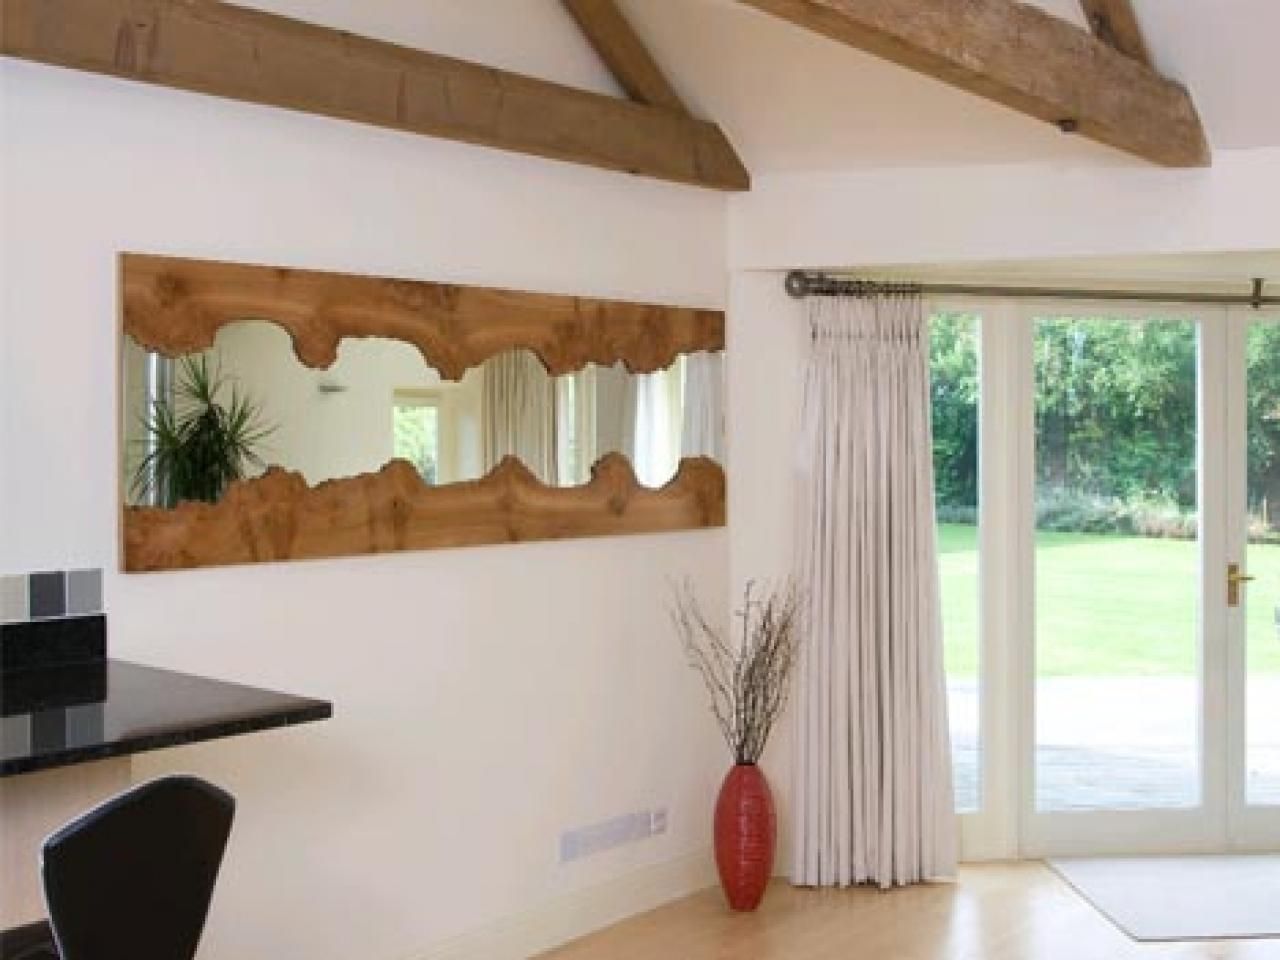 Wooden Bookcases With Glass Doors, Natural Wood Framed Mirror Wood Inside Natural Wood Framed Mirrors (View 10 of 20)